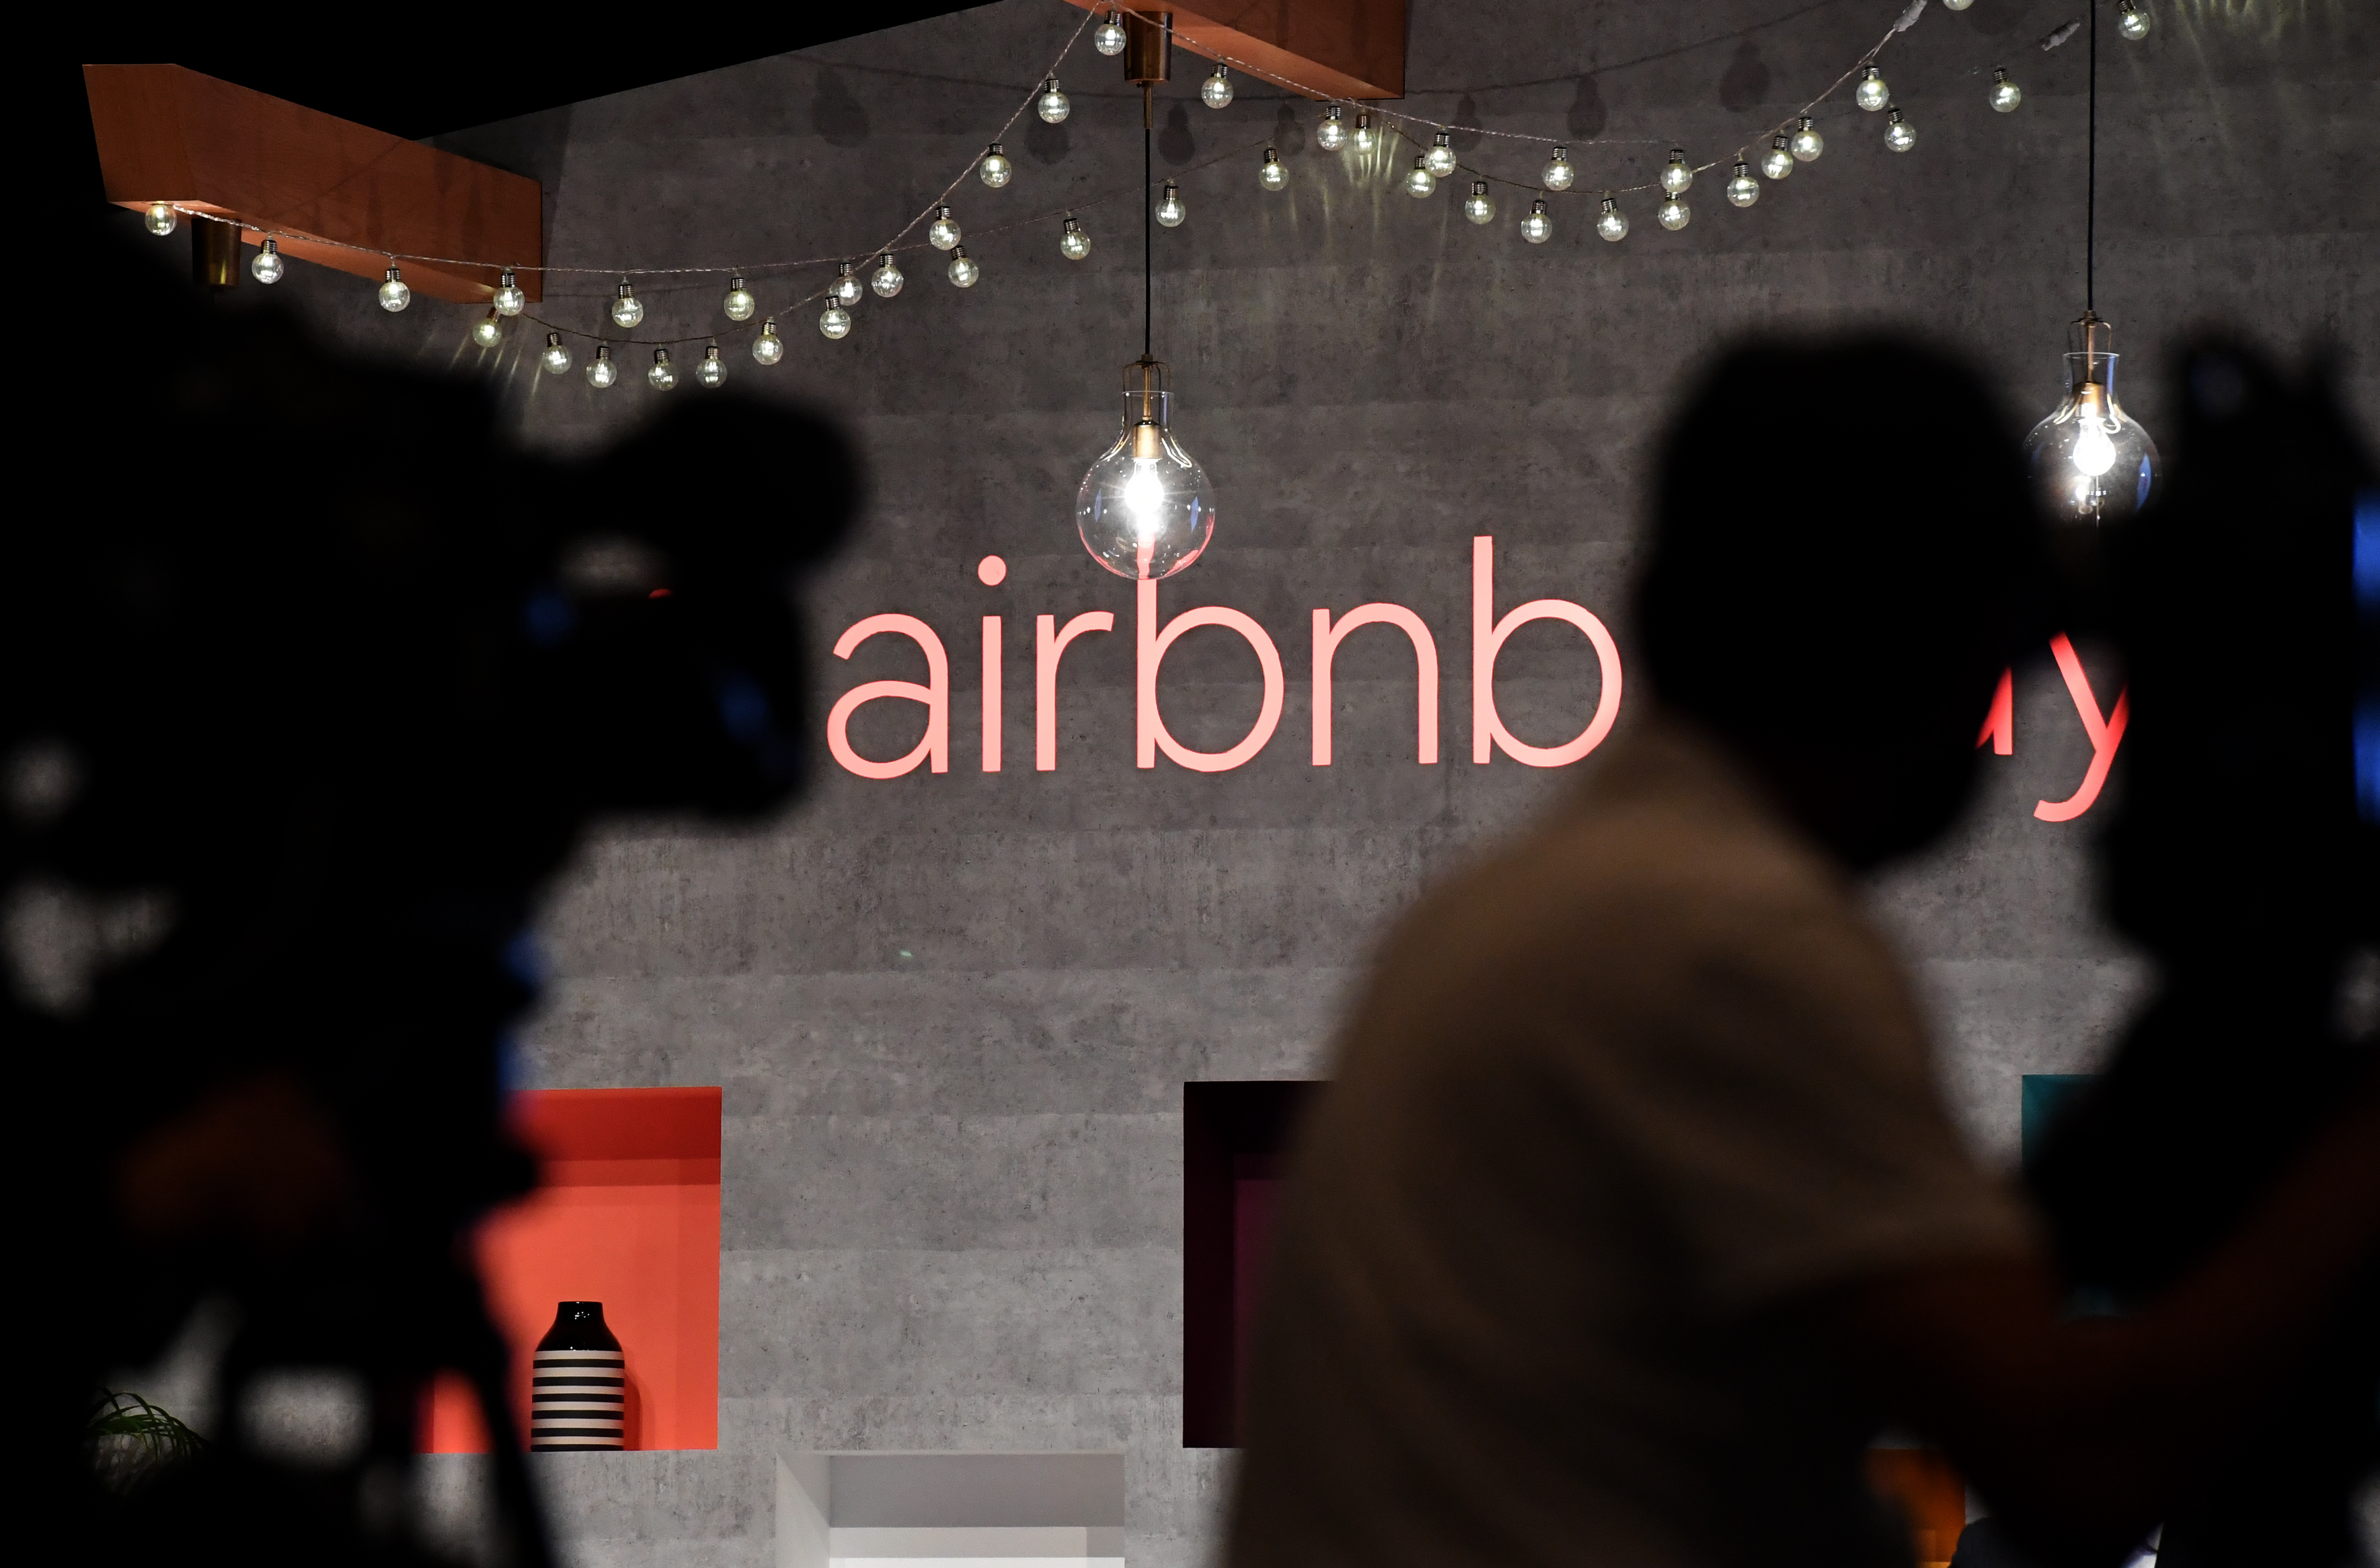 The US rental site Airbnb logo is displayed during the company's press conference in Tokyo on June 14, 2018. (Photo by Toshifumi Kitamura/AFP via Getty Images)